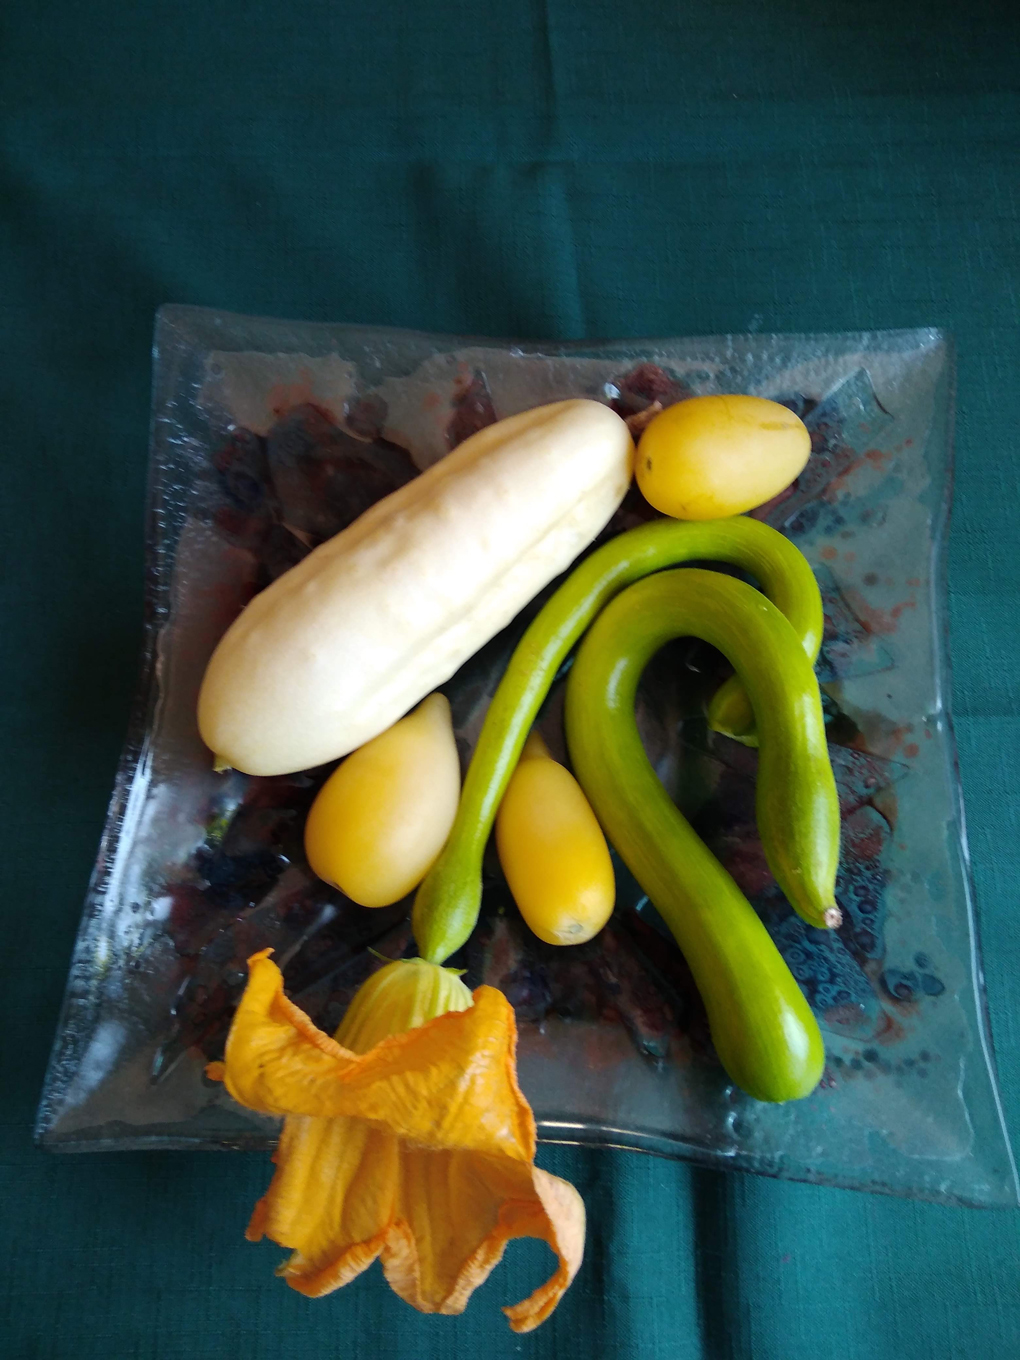 There is a white cucumber, yellow tomatoes and thin curly courgettes one with a beautiful yellow flower on o plate